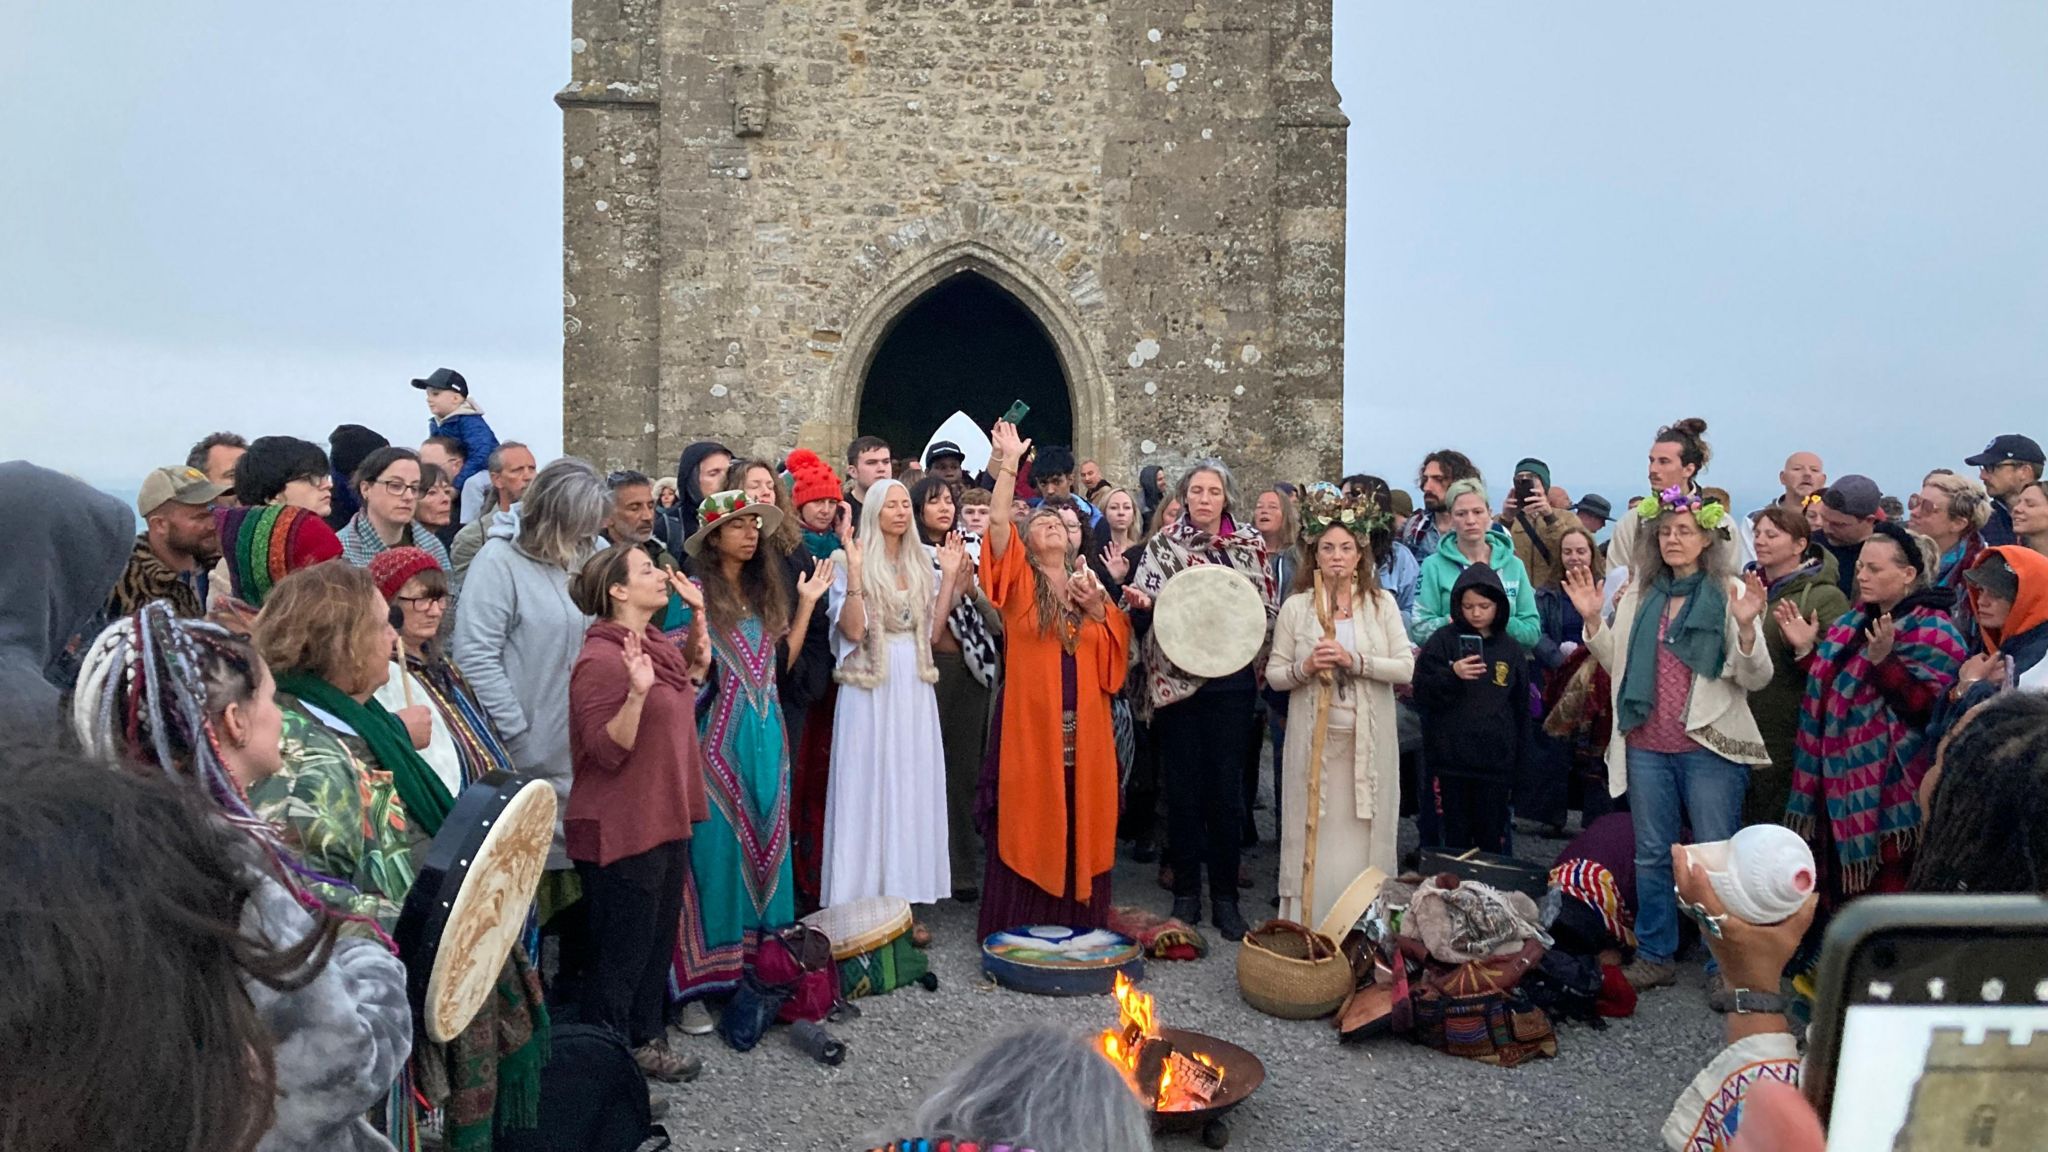 A crowd gathering at the Glastonbury Tor around a fire as dawn breaks